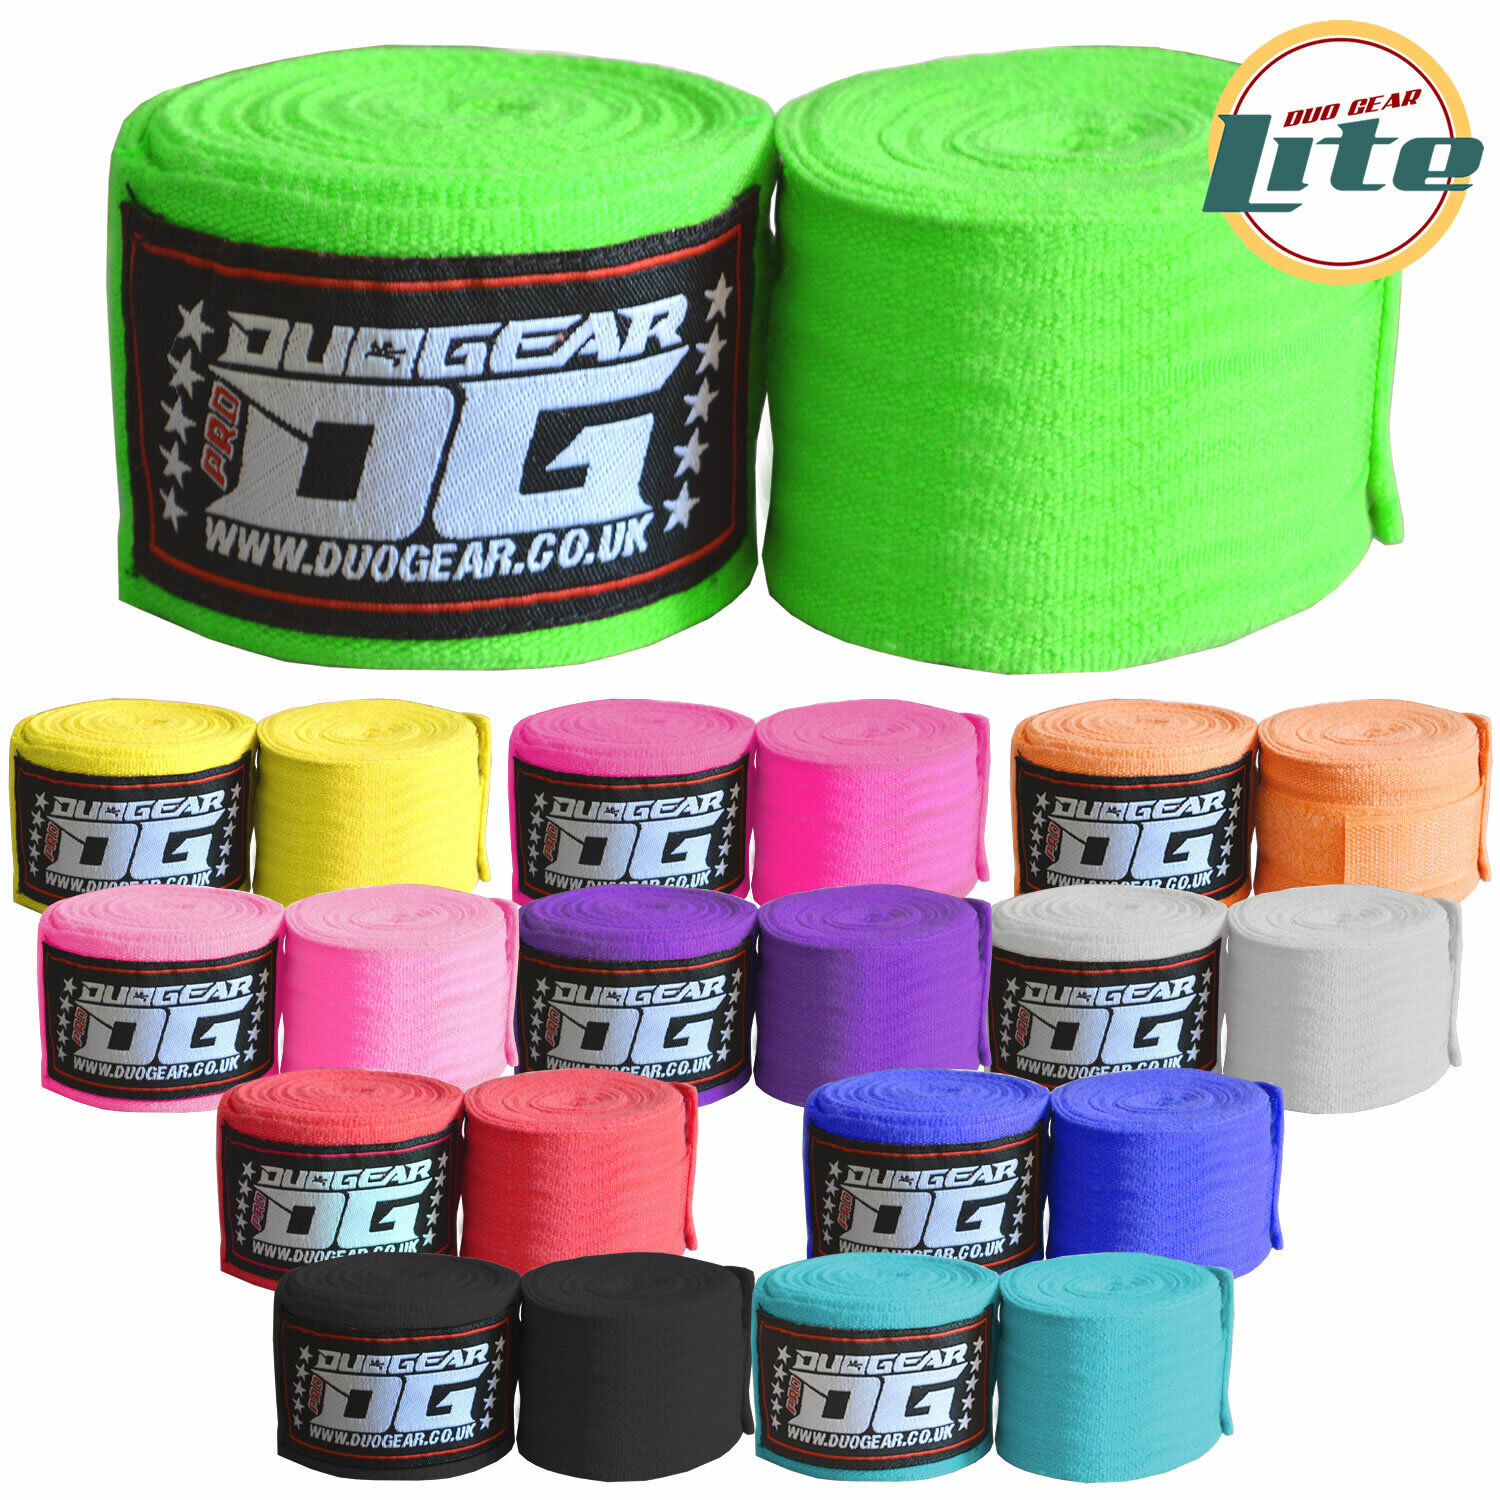 DUO GEAR MUAY THAI BOXING KICKBOXING BANDAGE HAND WRAPS 2.5m (Kids - Adults) - Picture 1 of 12